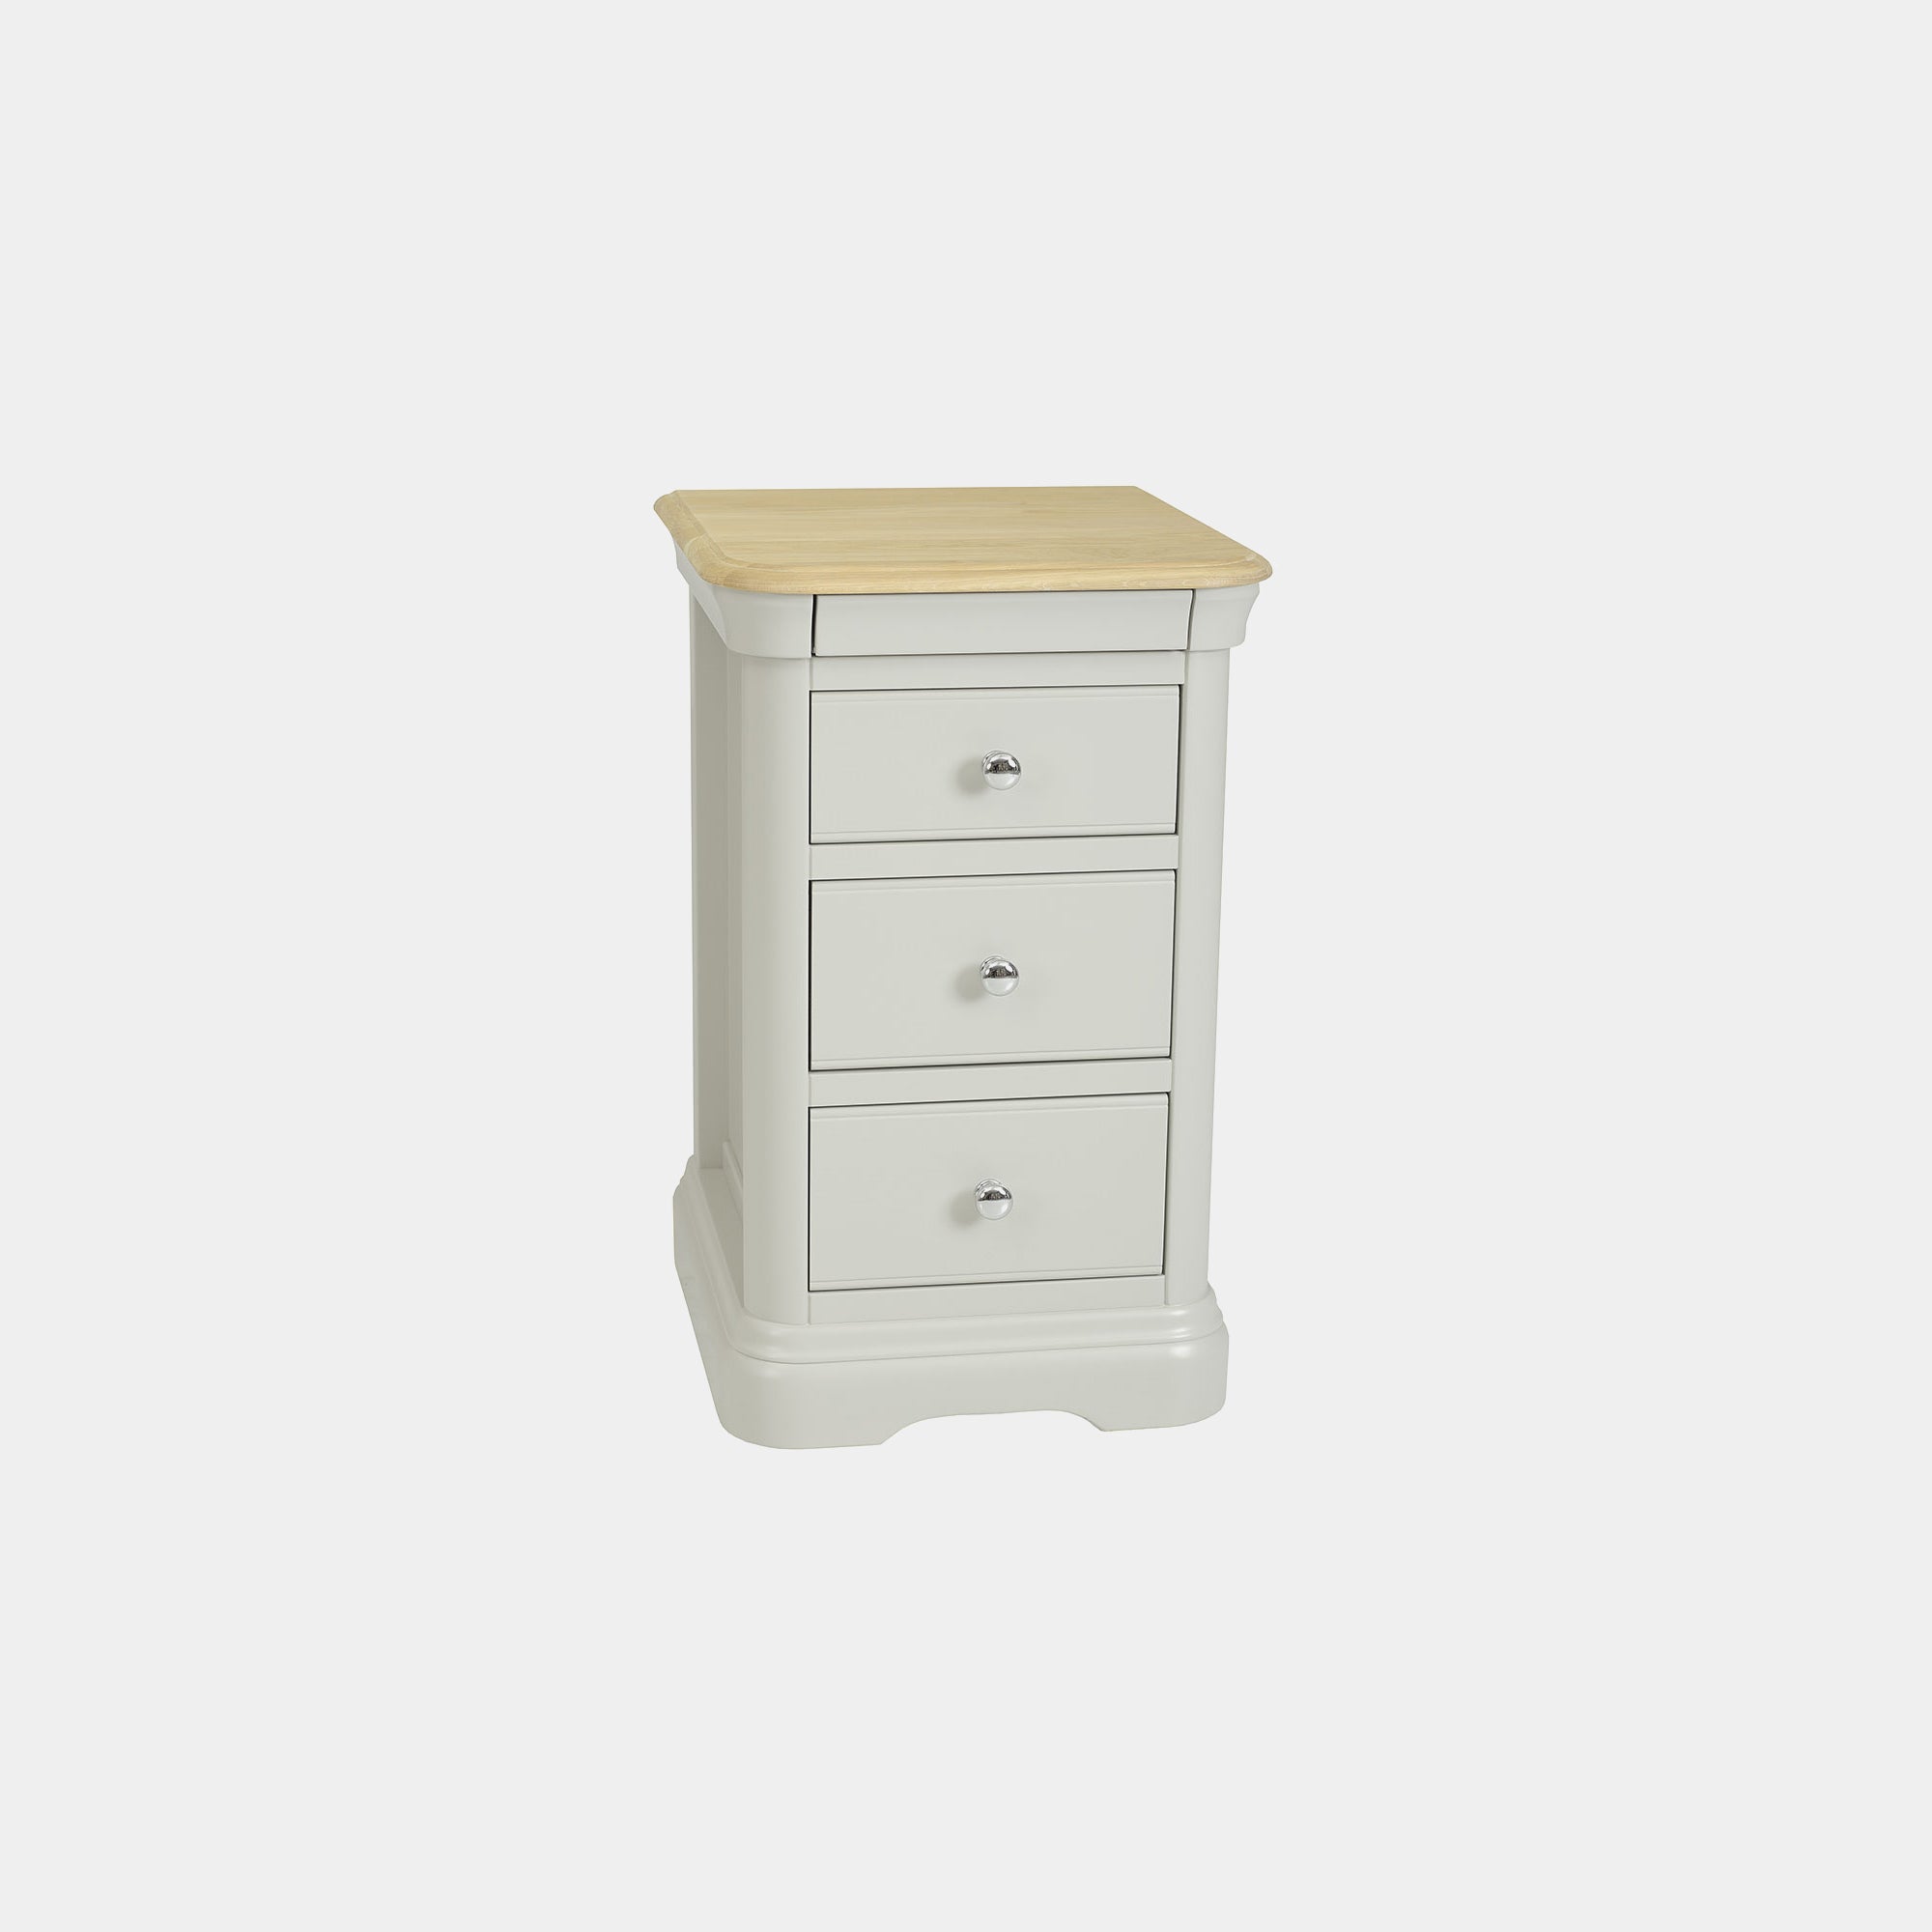 Reed - Bedside Chest 3 Drawers